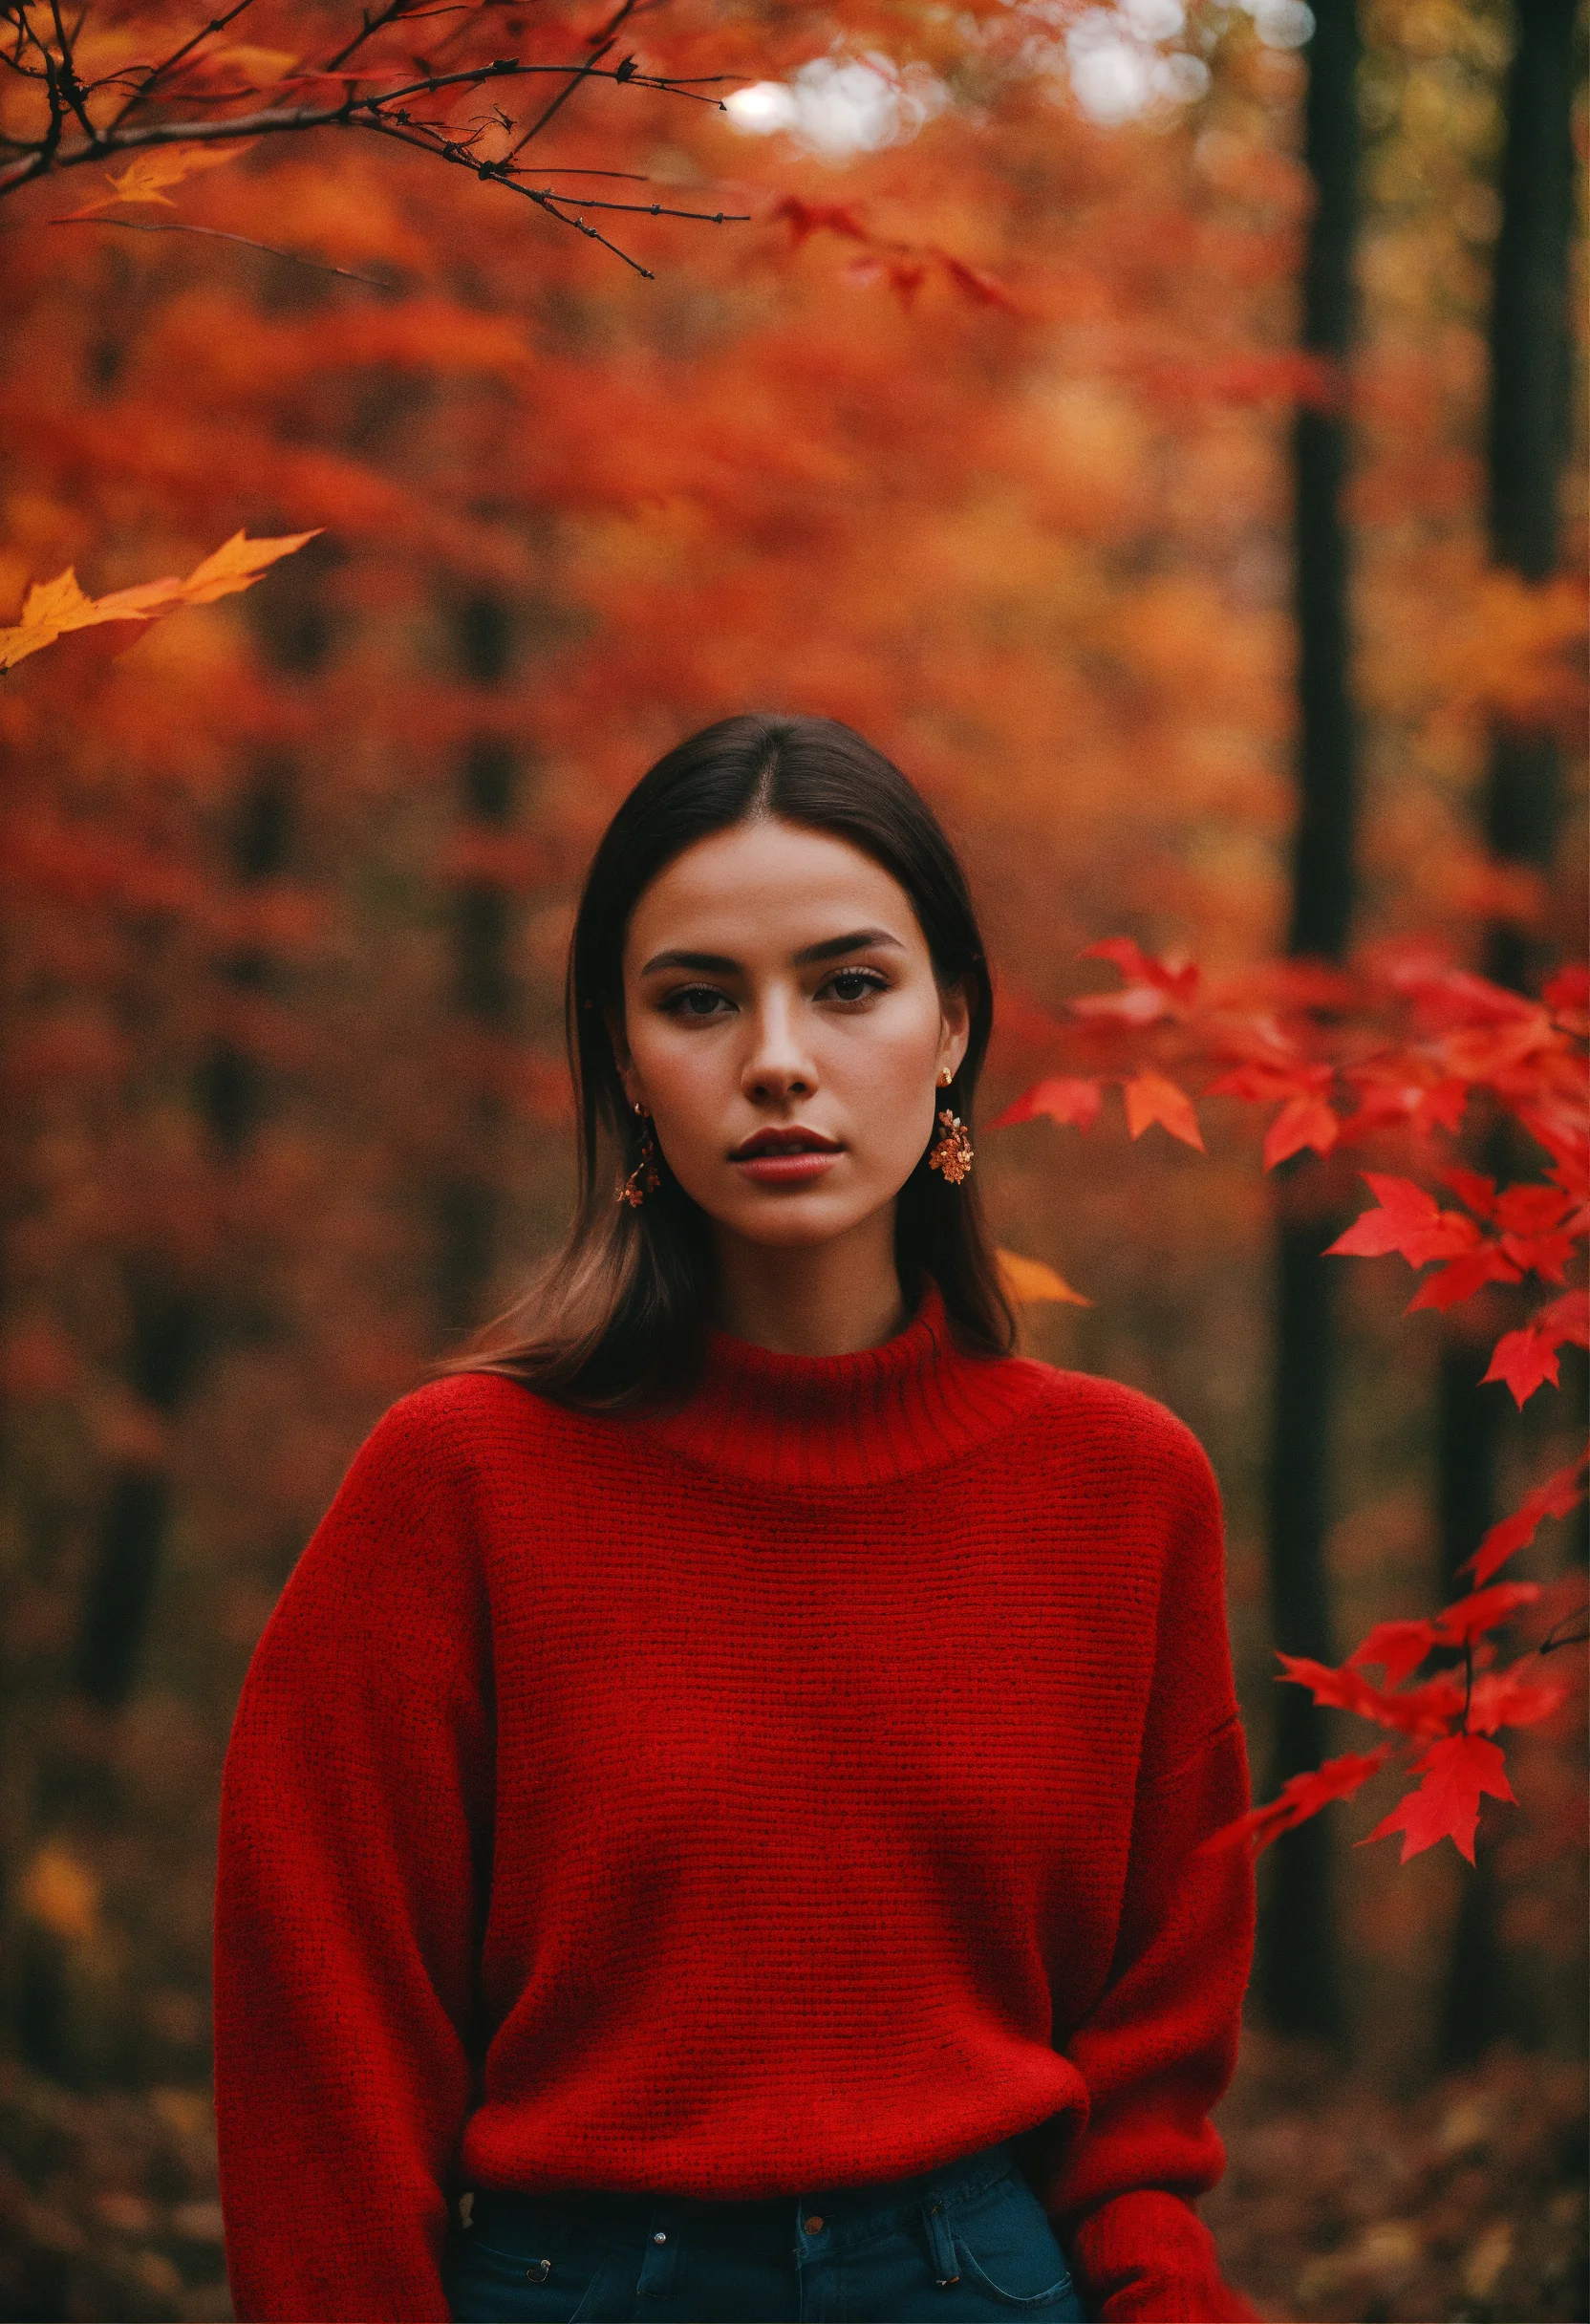 Portrait Of Pretty Girl Wearing Sweater On A Light Background